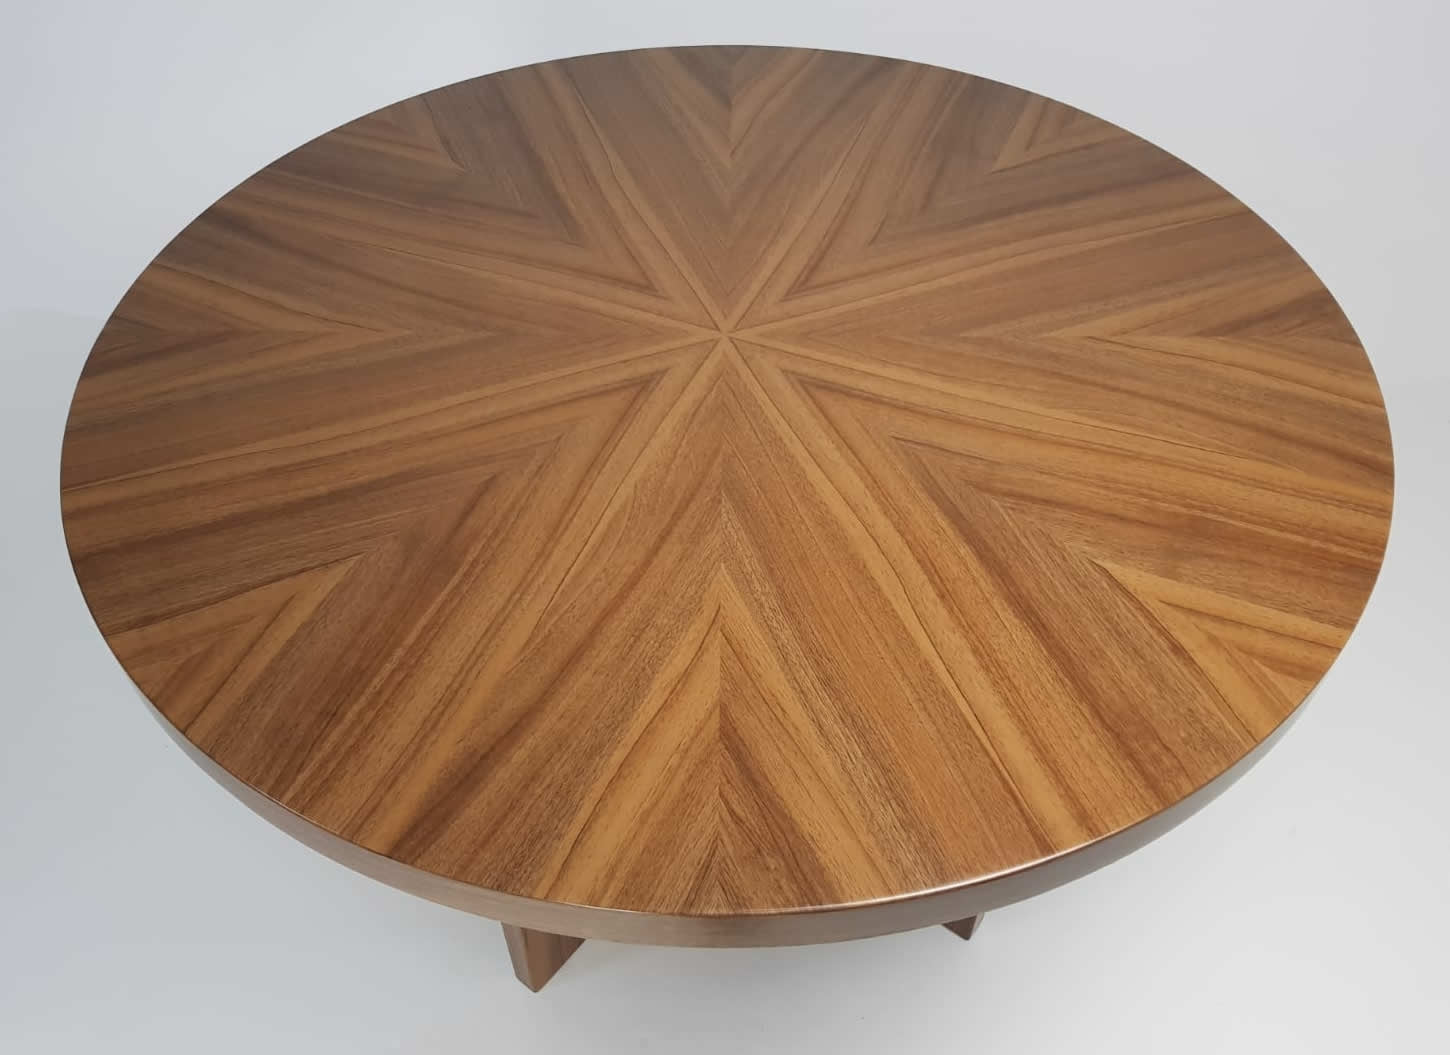 Executive Round Meeting Table in Light Oak - B02